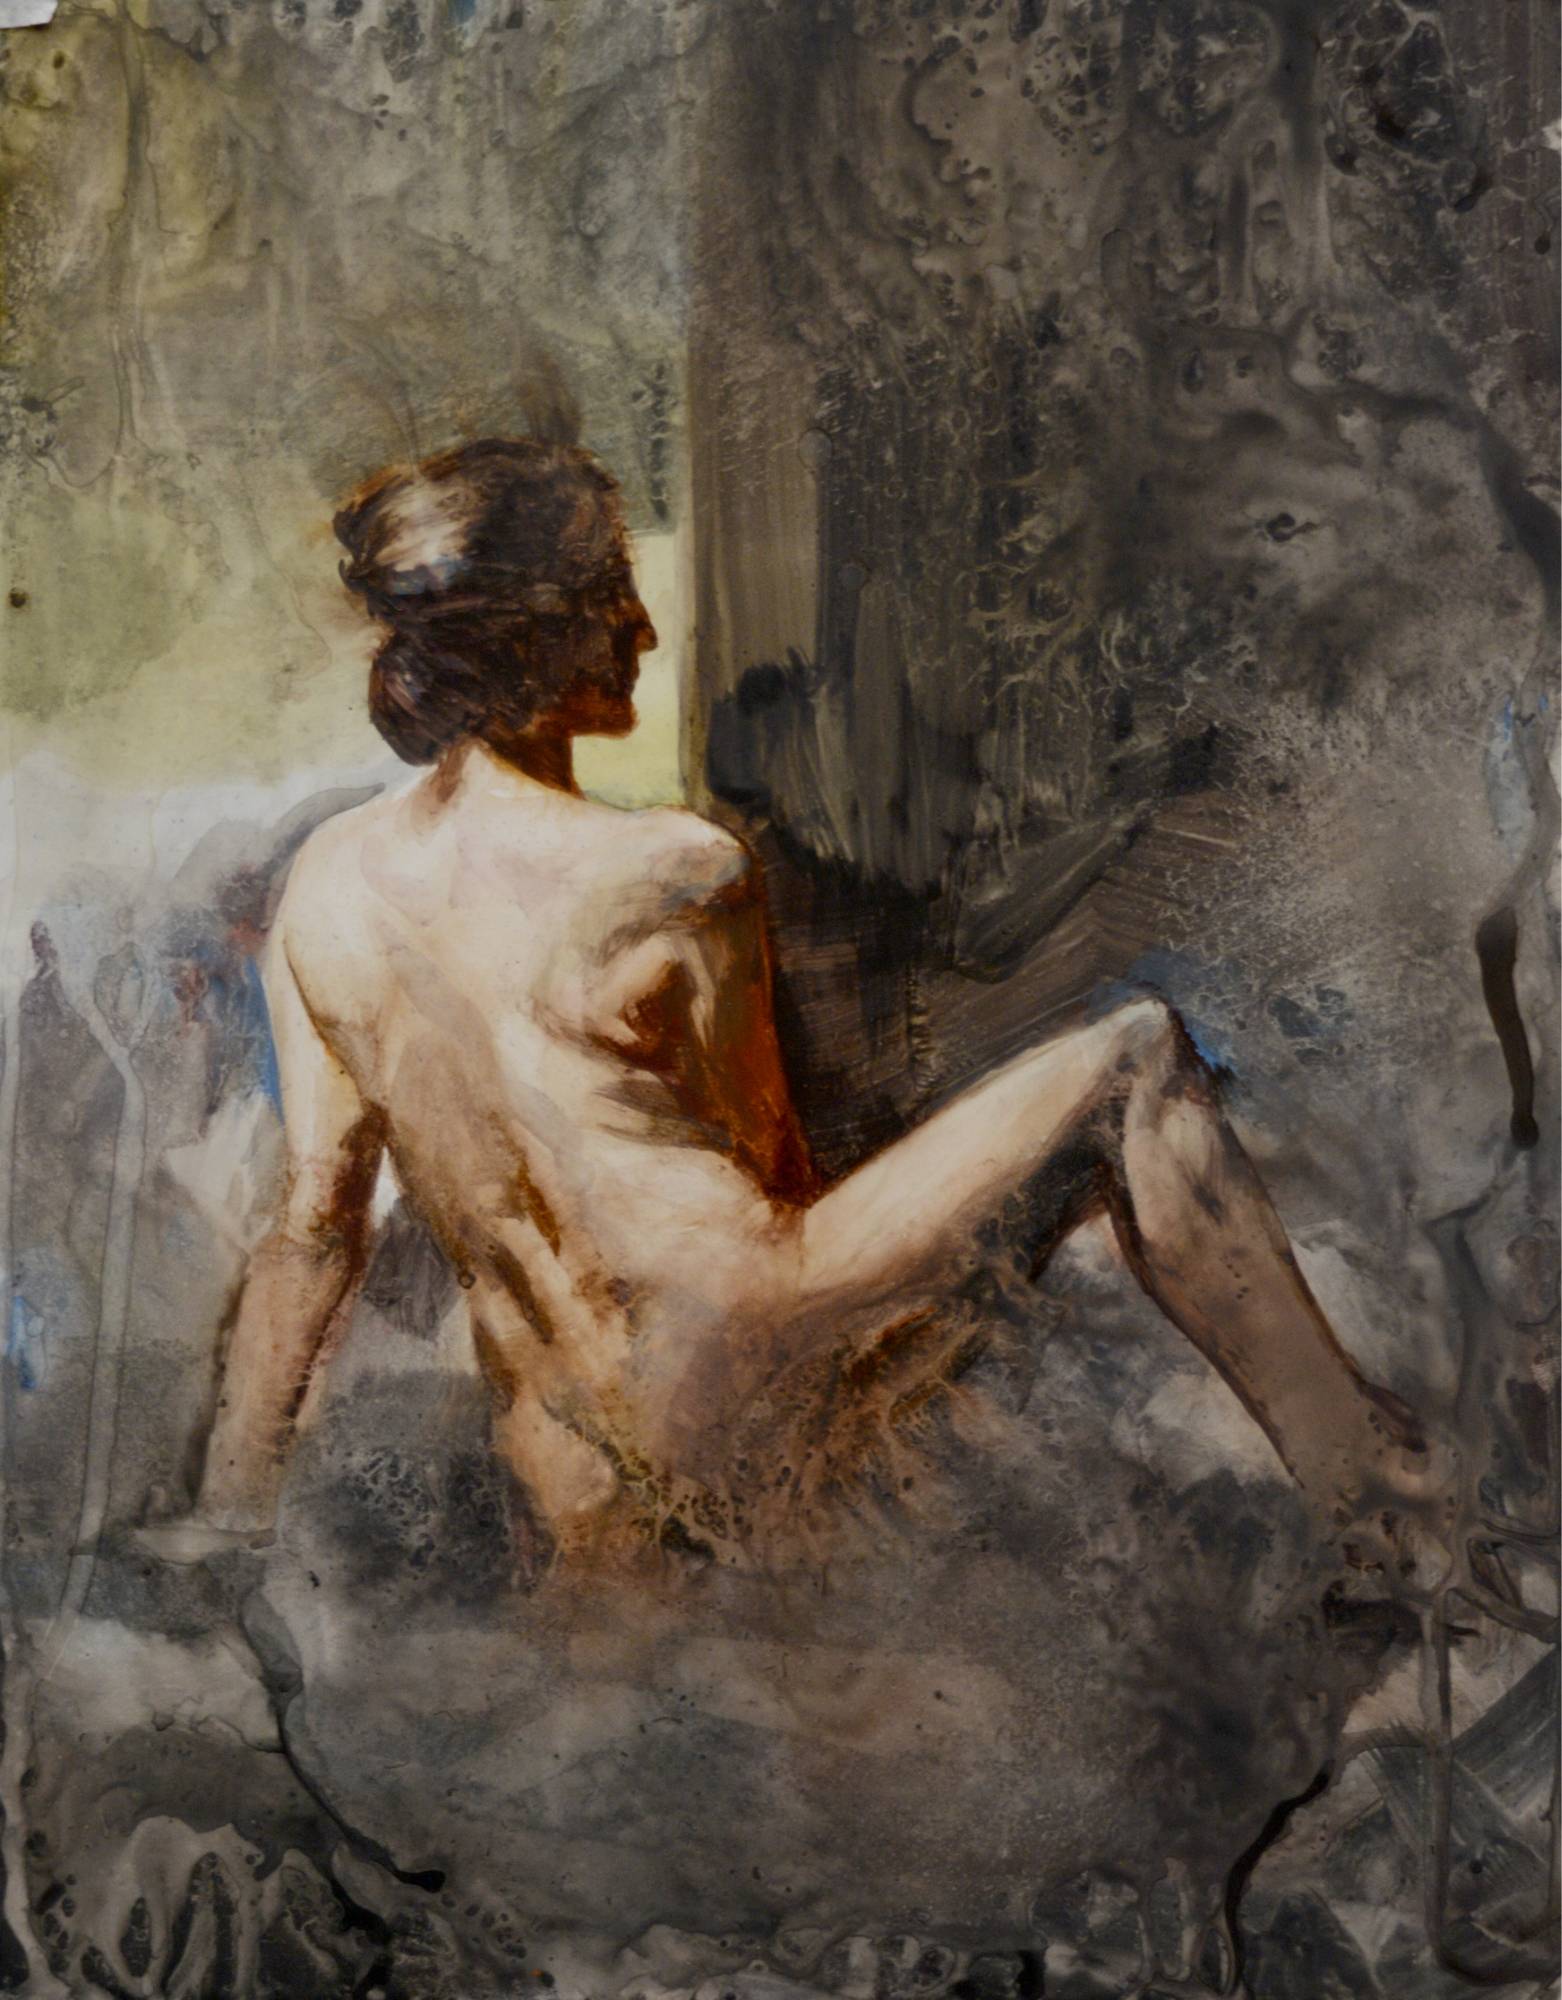 watercolor painting showing the model posed knee up in profile, torso twisted away from the viewer against an abstract background